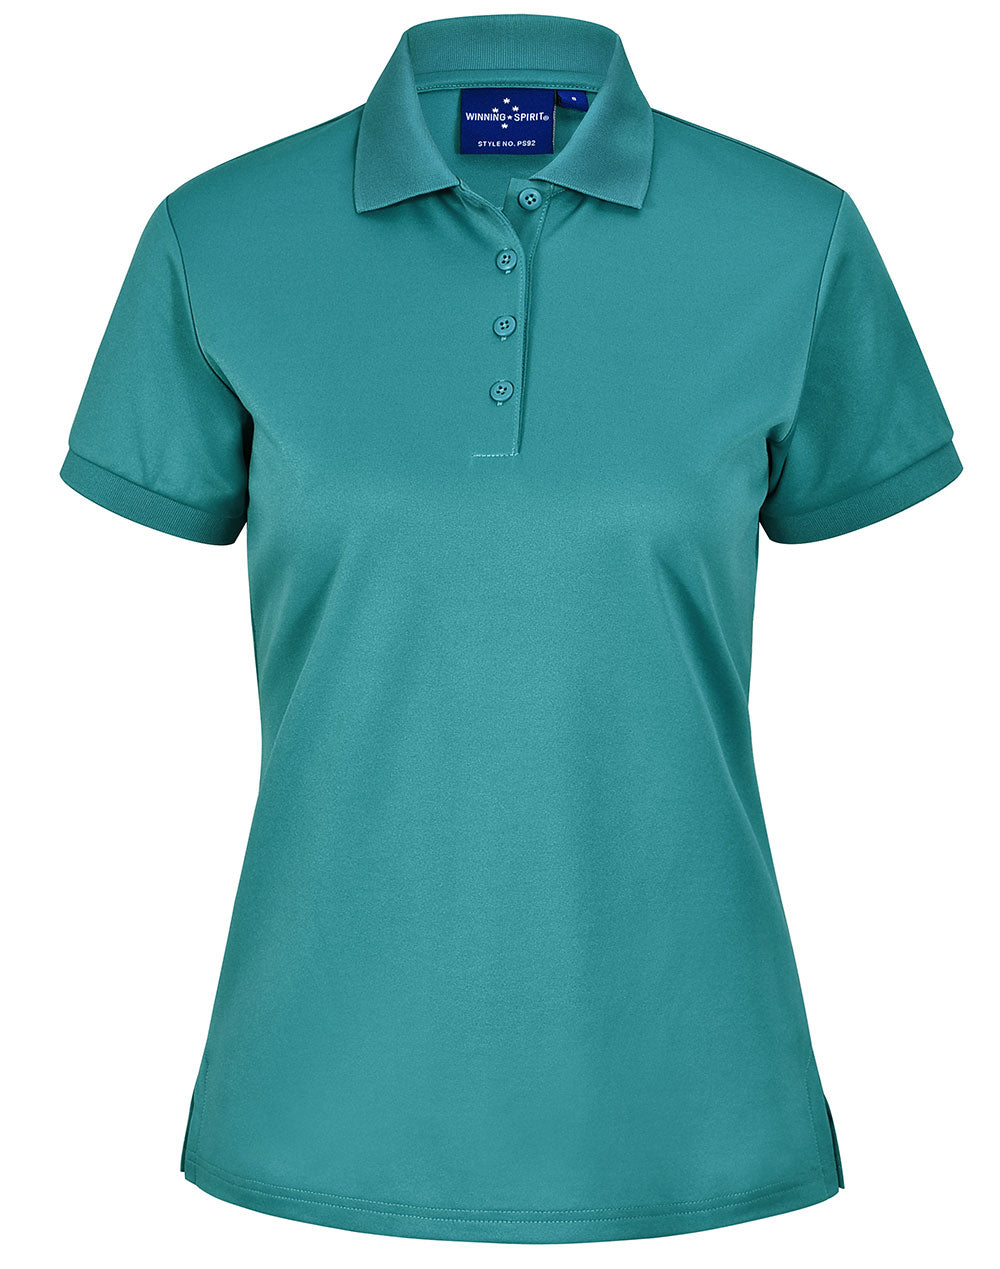 Winning Spirit Ladie's Sustainable Poly/Cotton Corporate Polo PS92 Casual Wear Winning Spirit Teal 8 